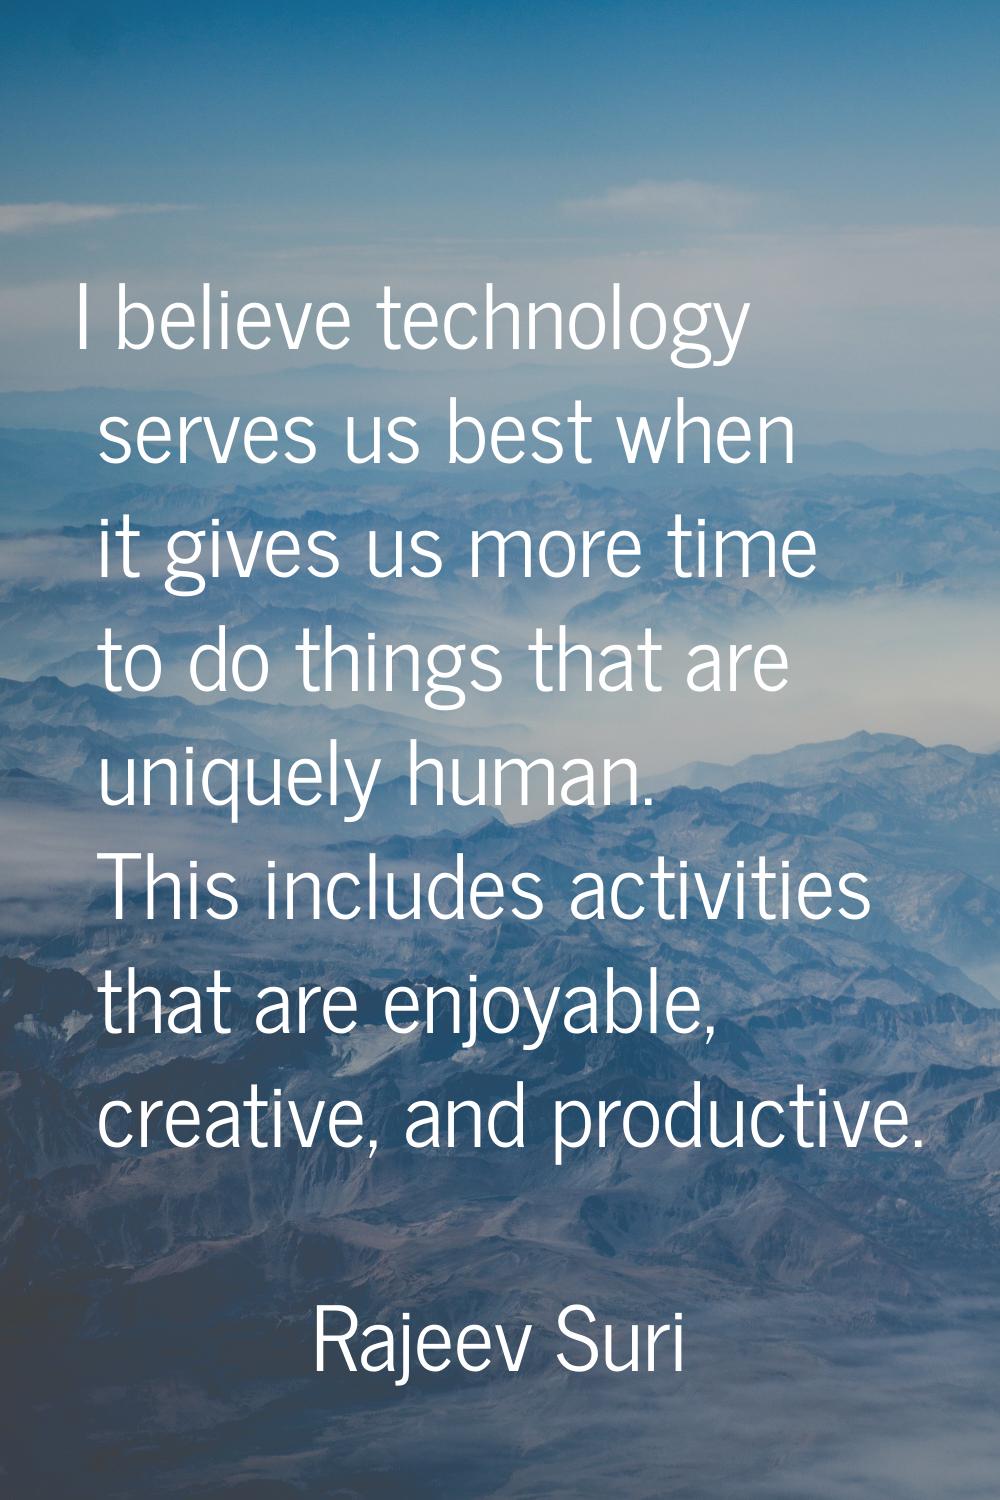 I believe technology serves us best when it gives us more time to do things that are uniquely human